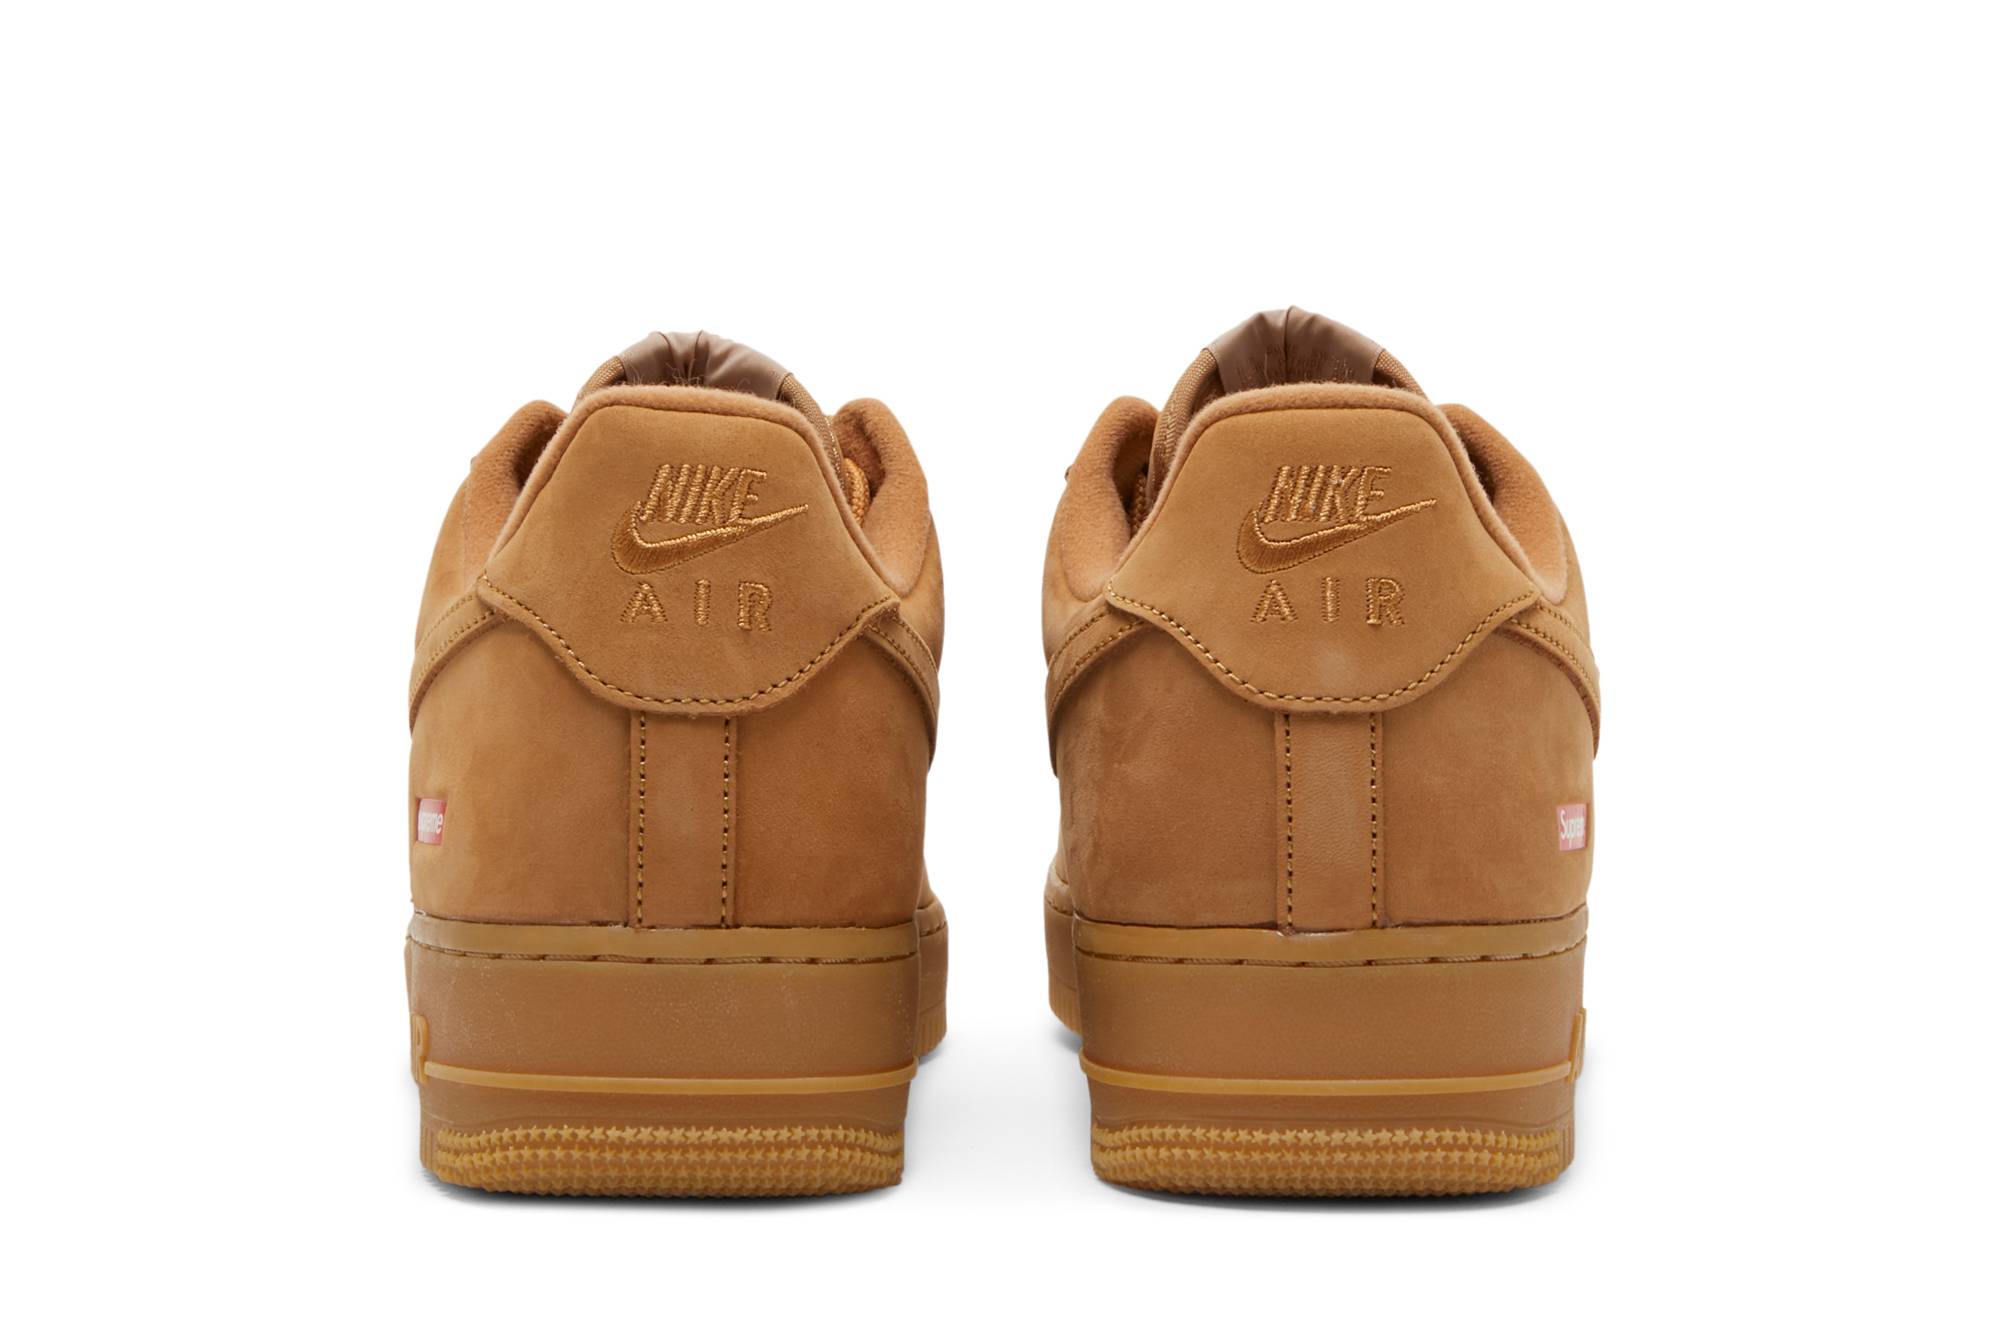 Supreme x Nike Air Force 1 Low SP 'Wheat' DN1555-200